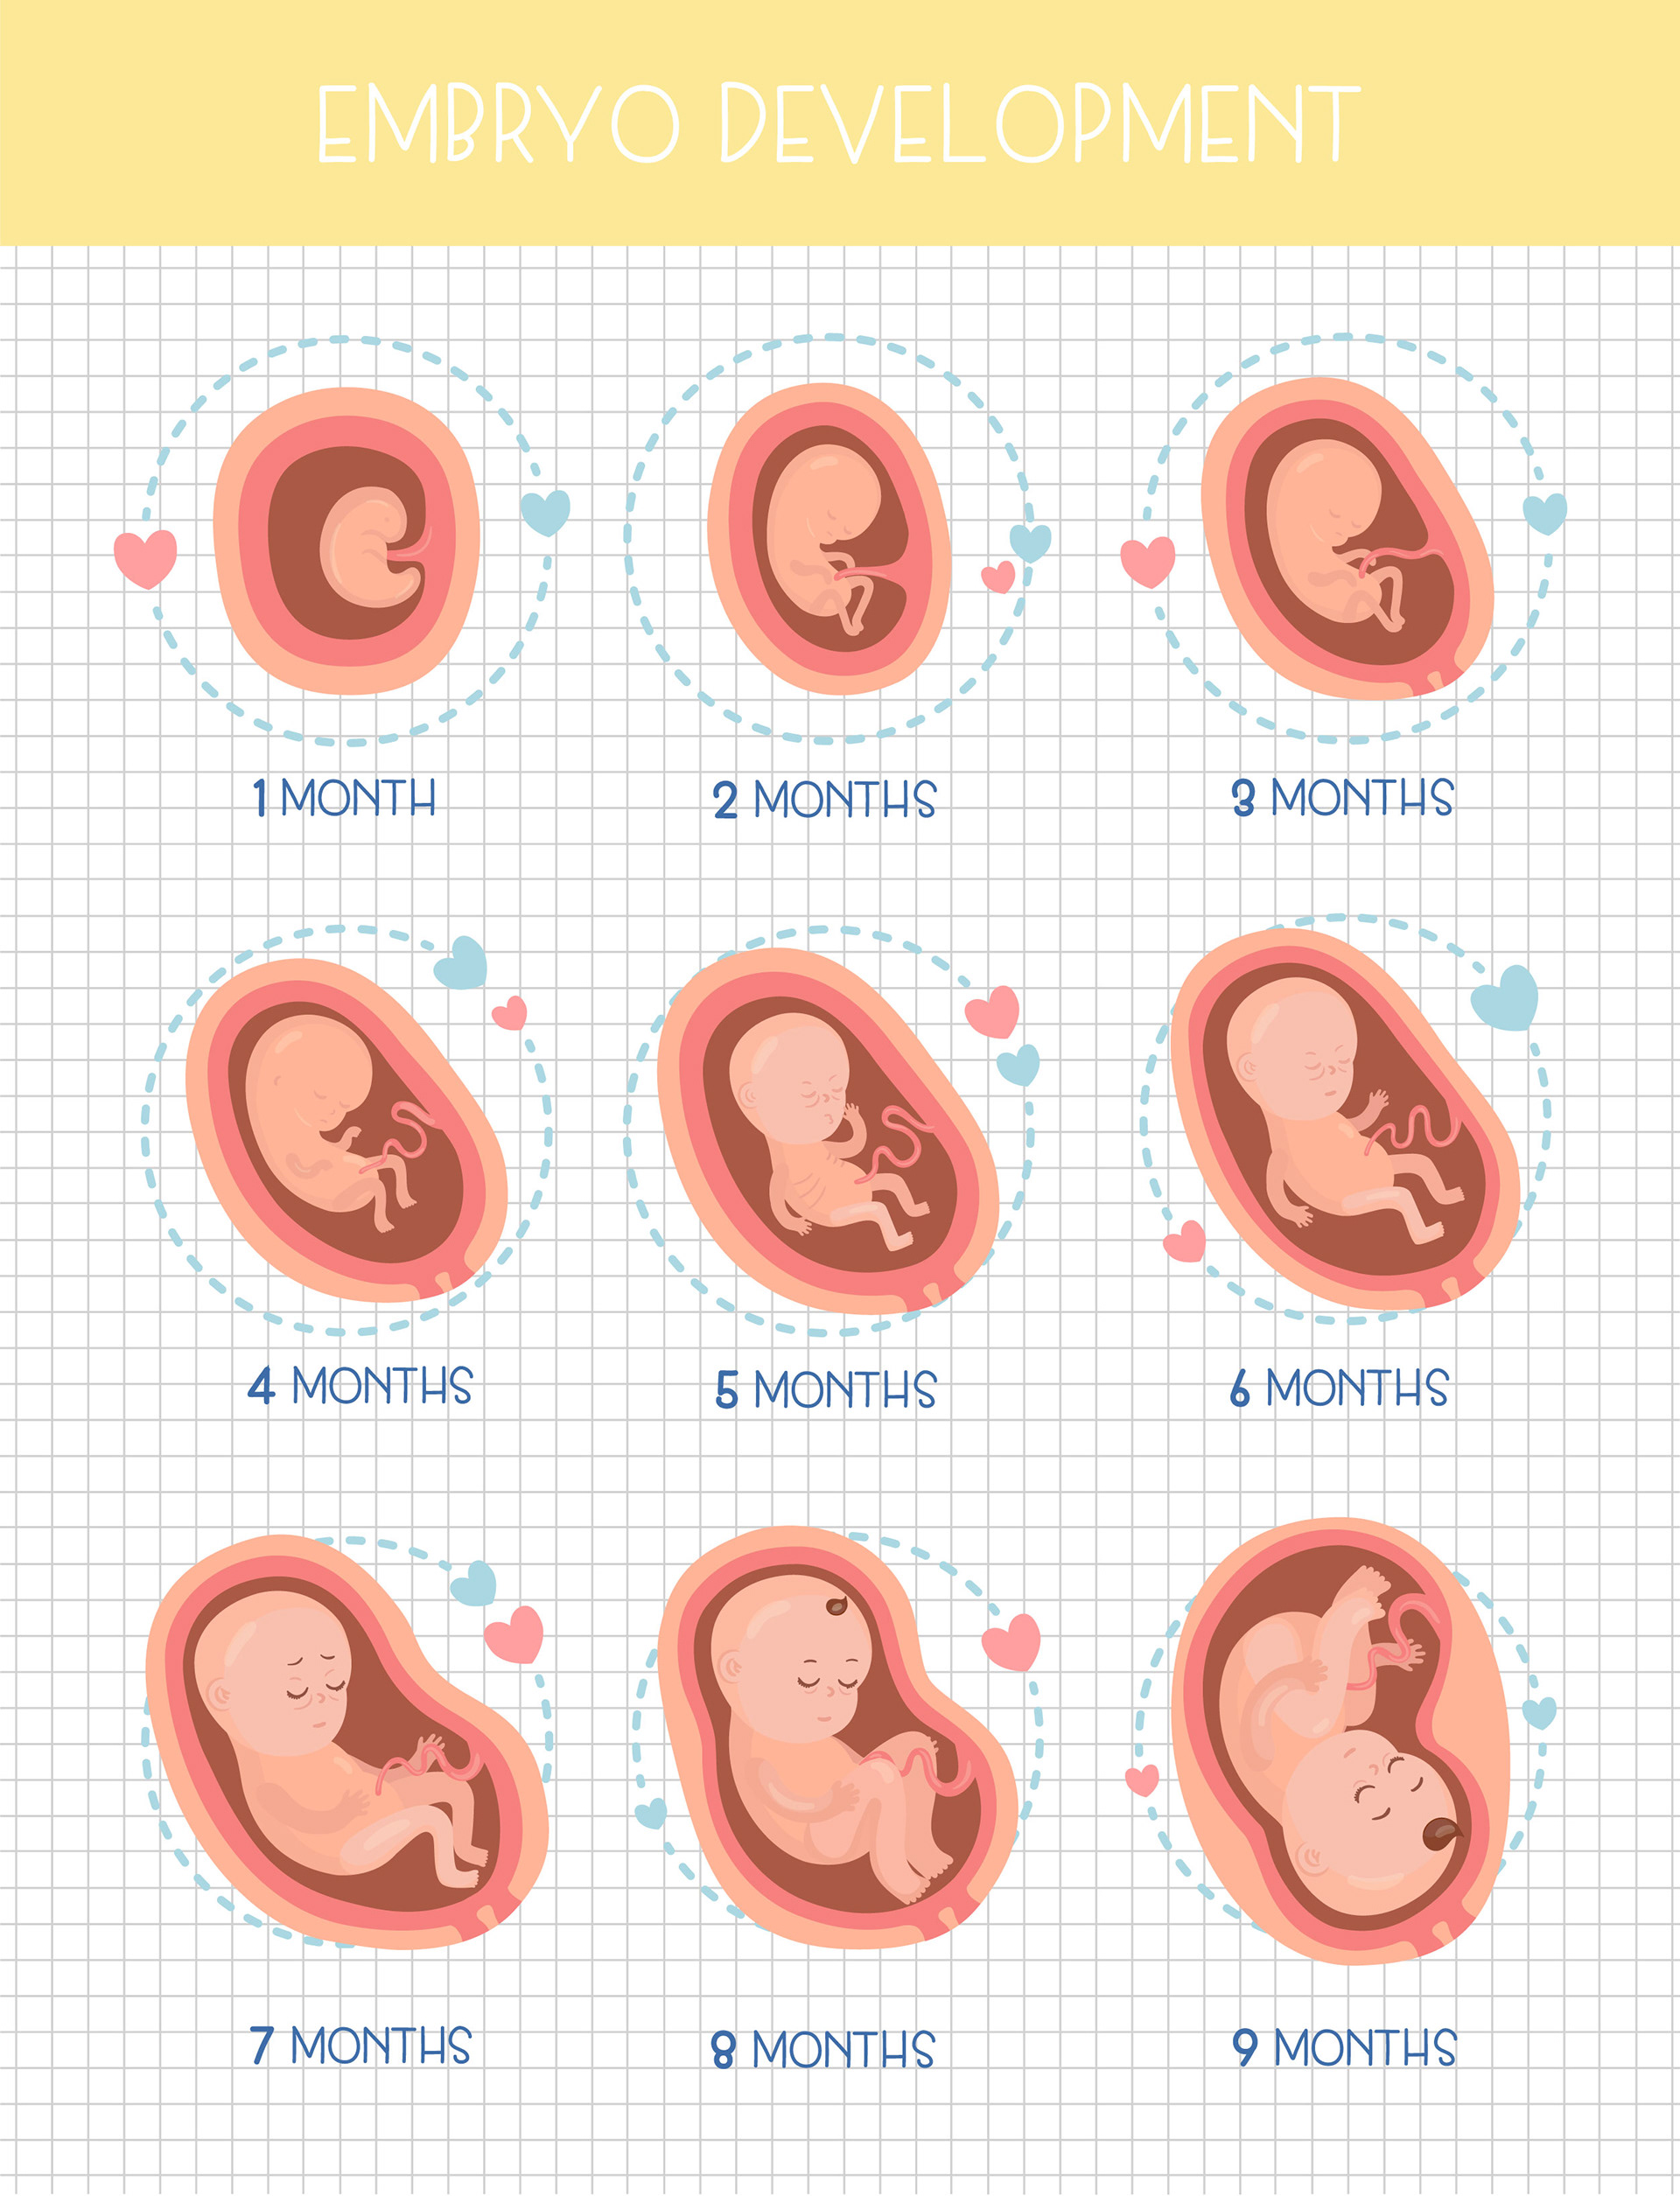 Baby Development Stages During Pregnancy: What You Need to Know